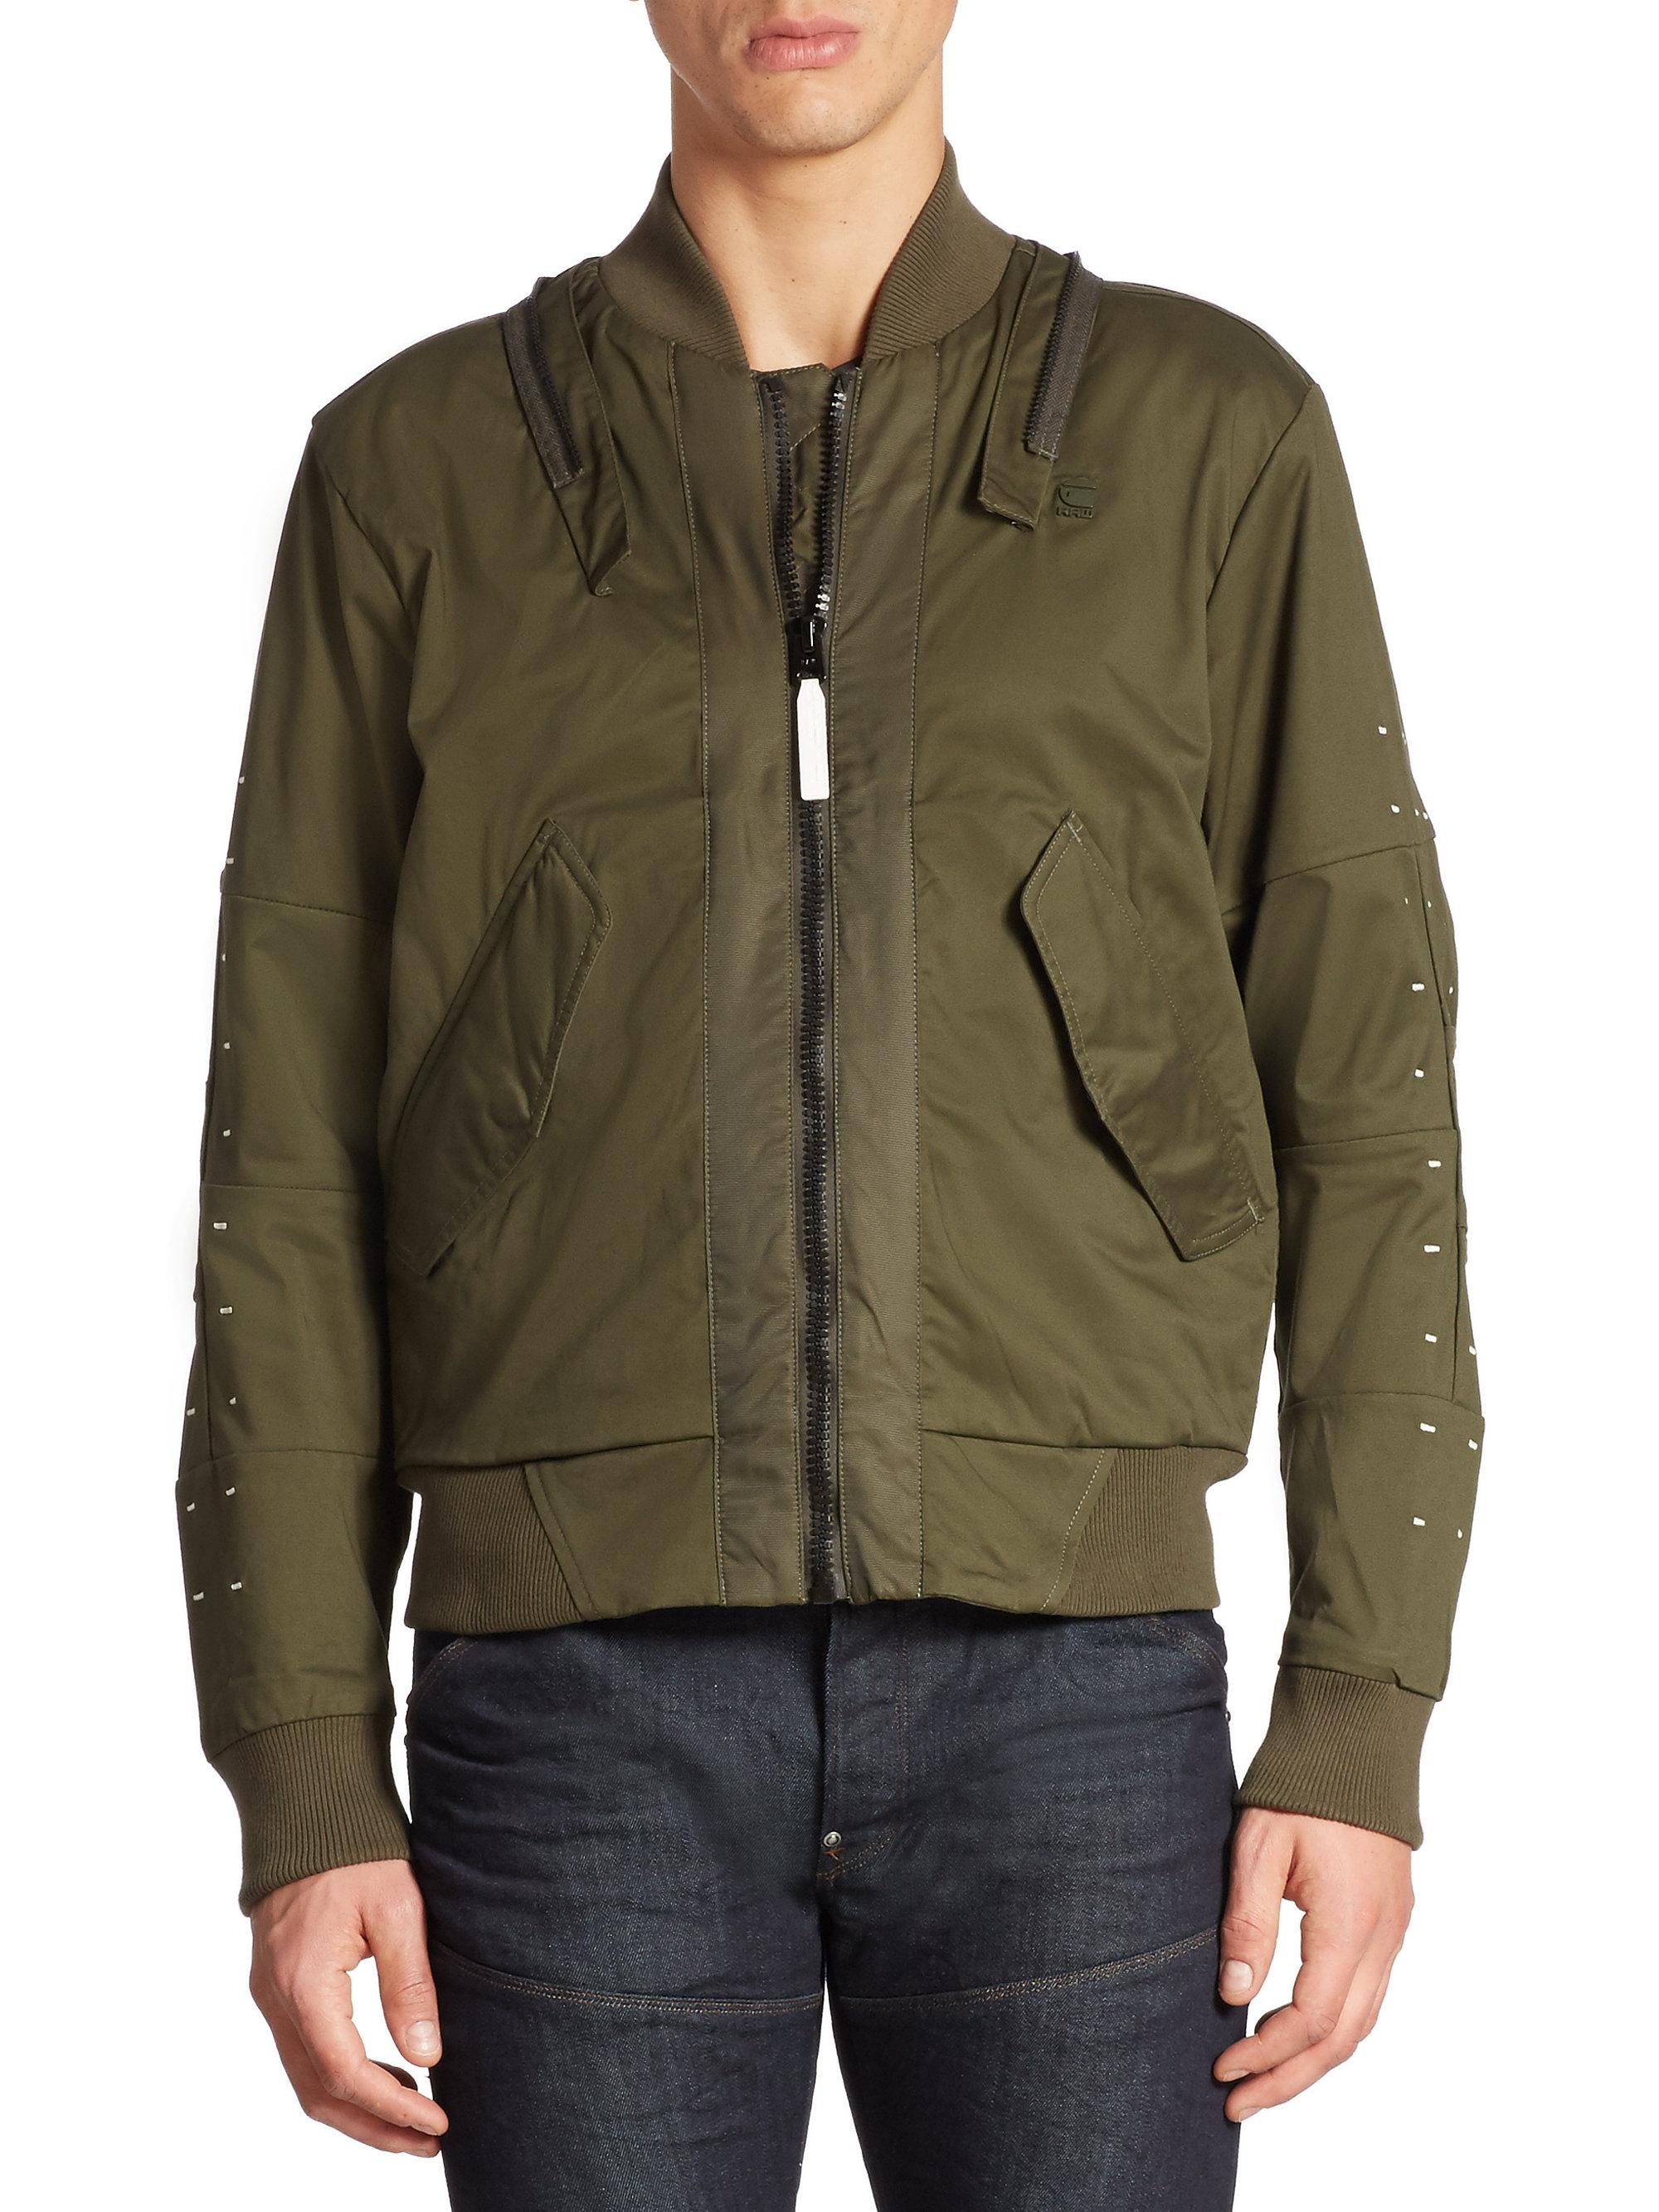 G-star raw Cotton-blend Bomber Jacket in Green for Men | Lyst